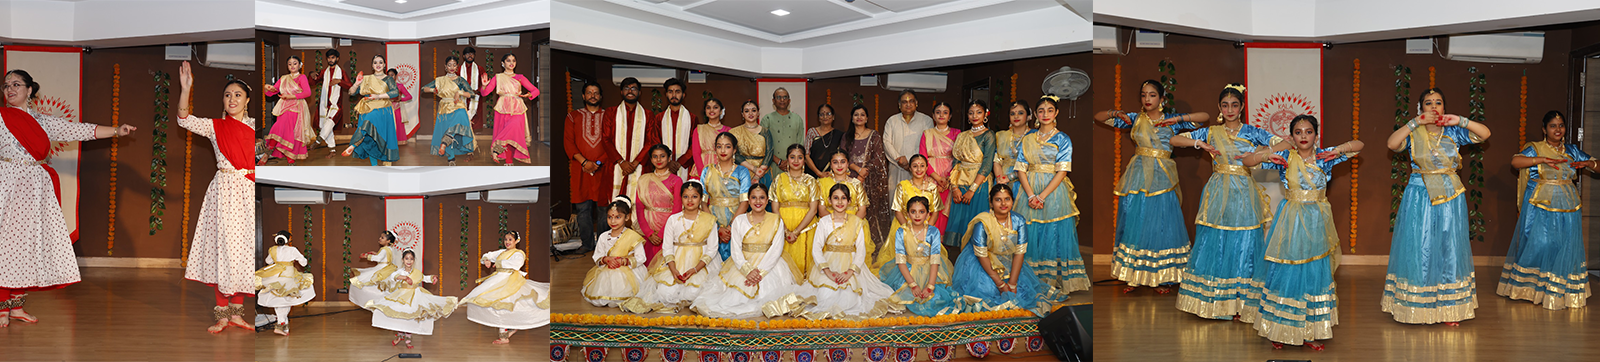 Int’l Dance Day: Kathak Dancers on Their Toes at Pracheen Kala Kendra